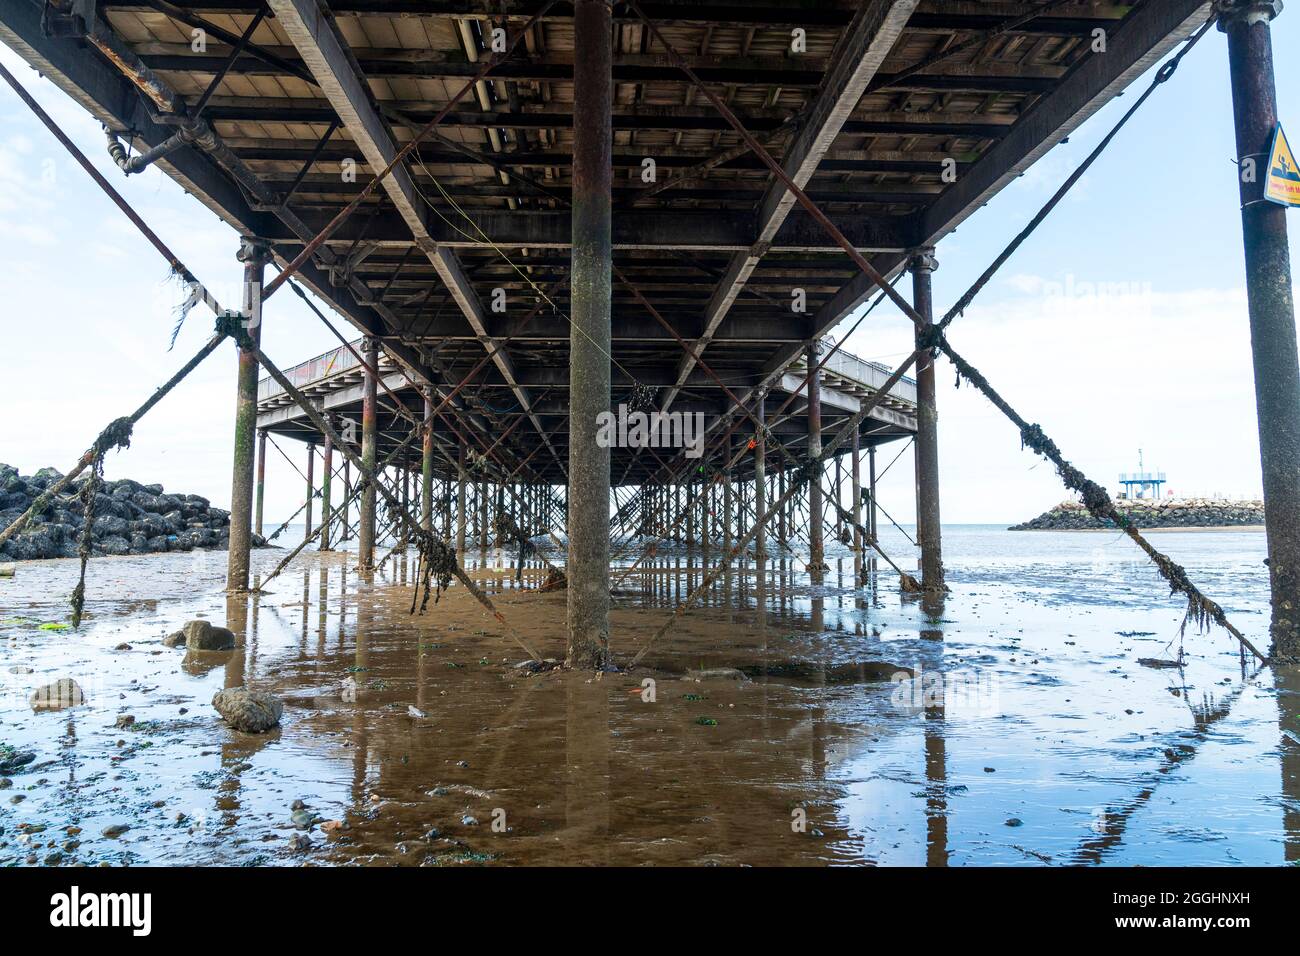 Underside of Herne Bay pier, England. A good example of a Victorian wood and iron pier. View along from beach showing struts and supports at low tide. Stock Photo